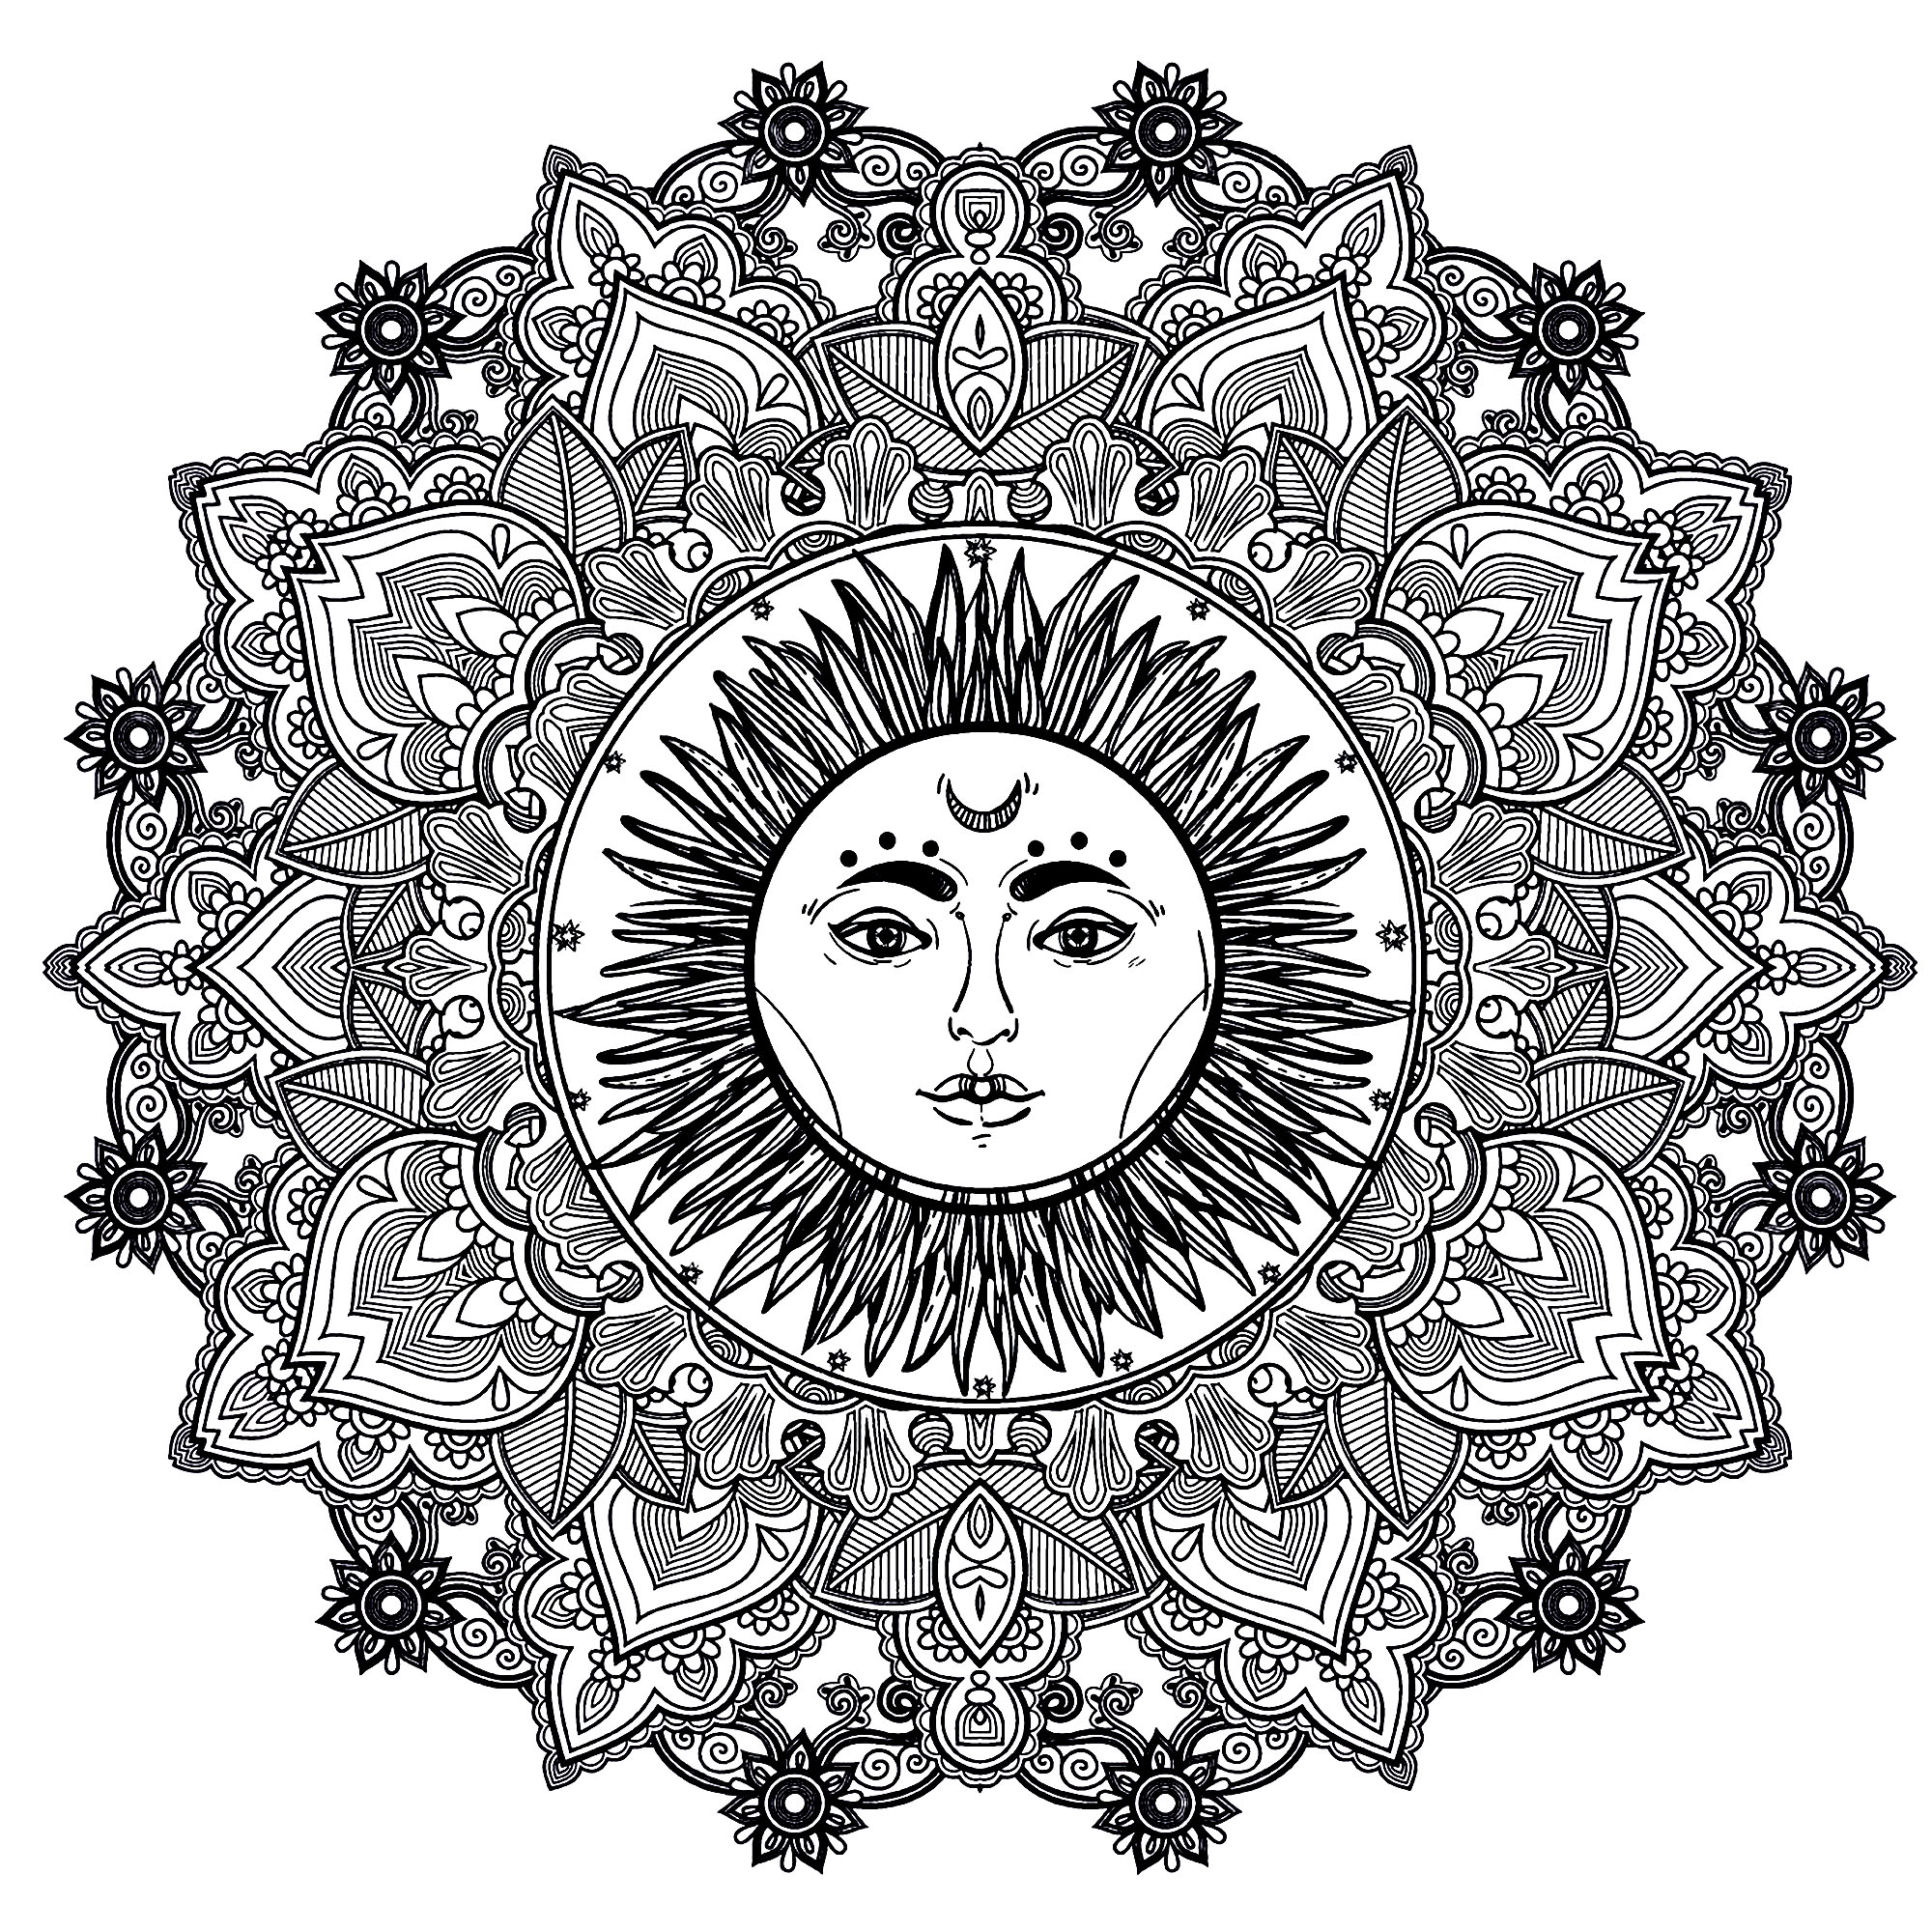 Mandala to color, with beautiful sun in center